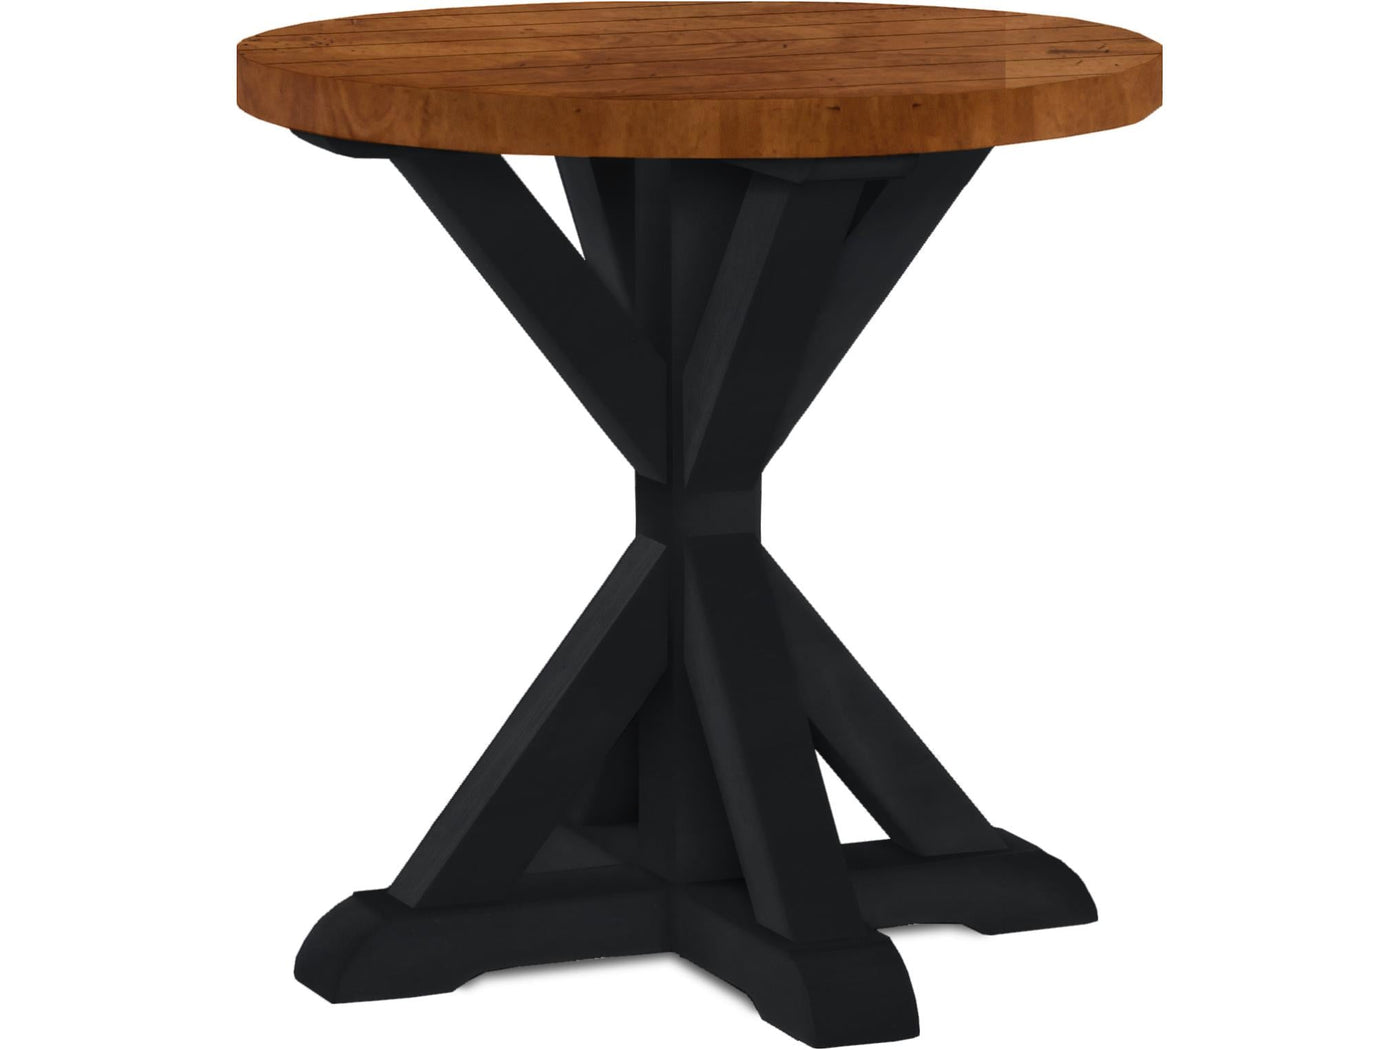 The Charm Round End Table